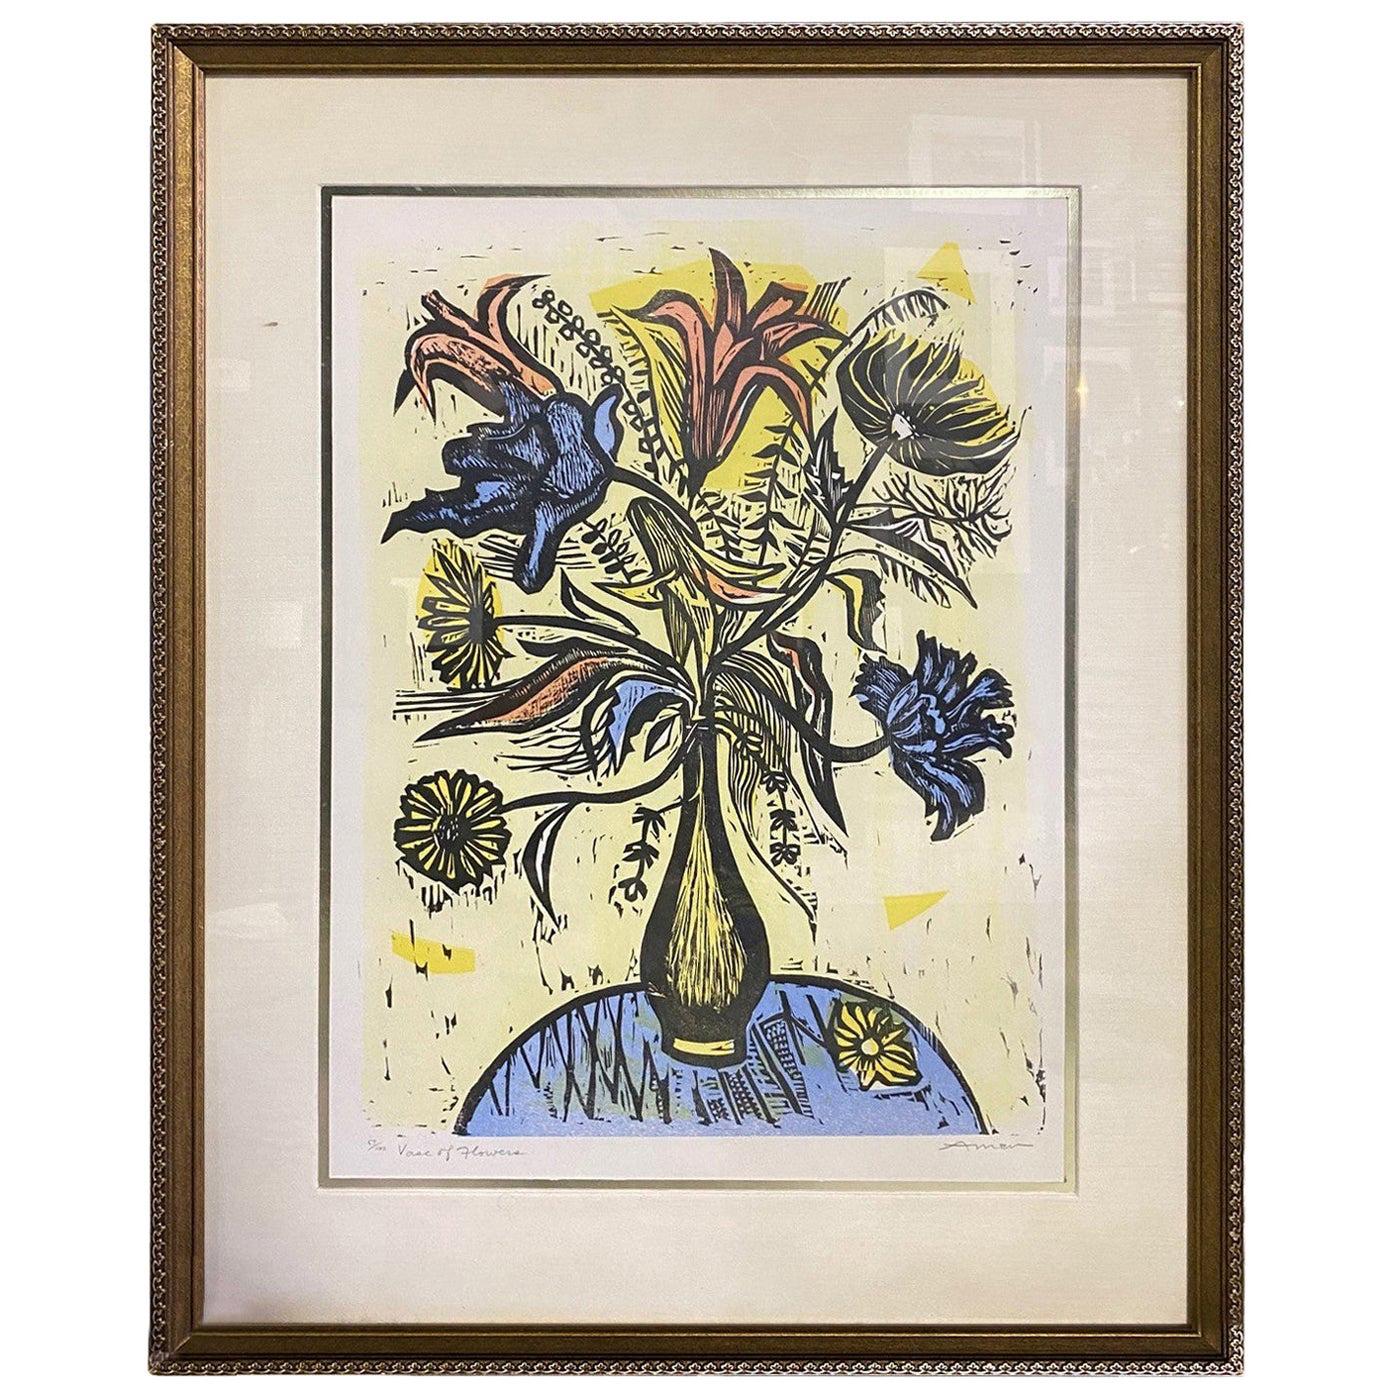 Irving Amen Signed Mid-Century Modern Limited Edition Woodcut Print Vase Flowers